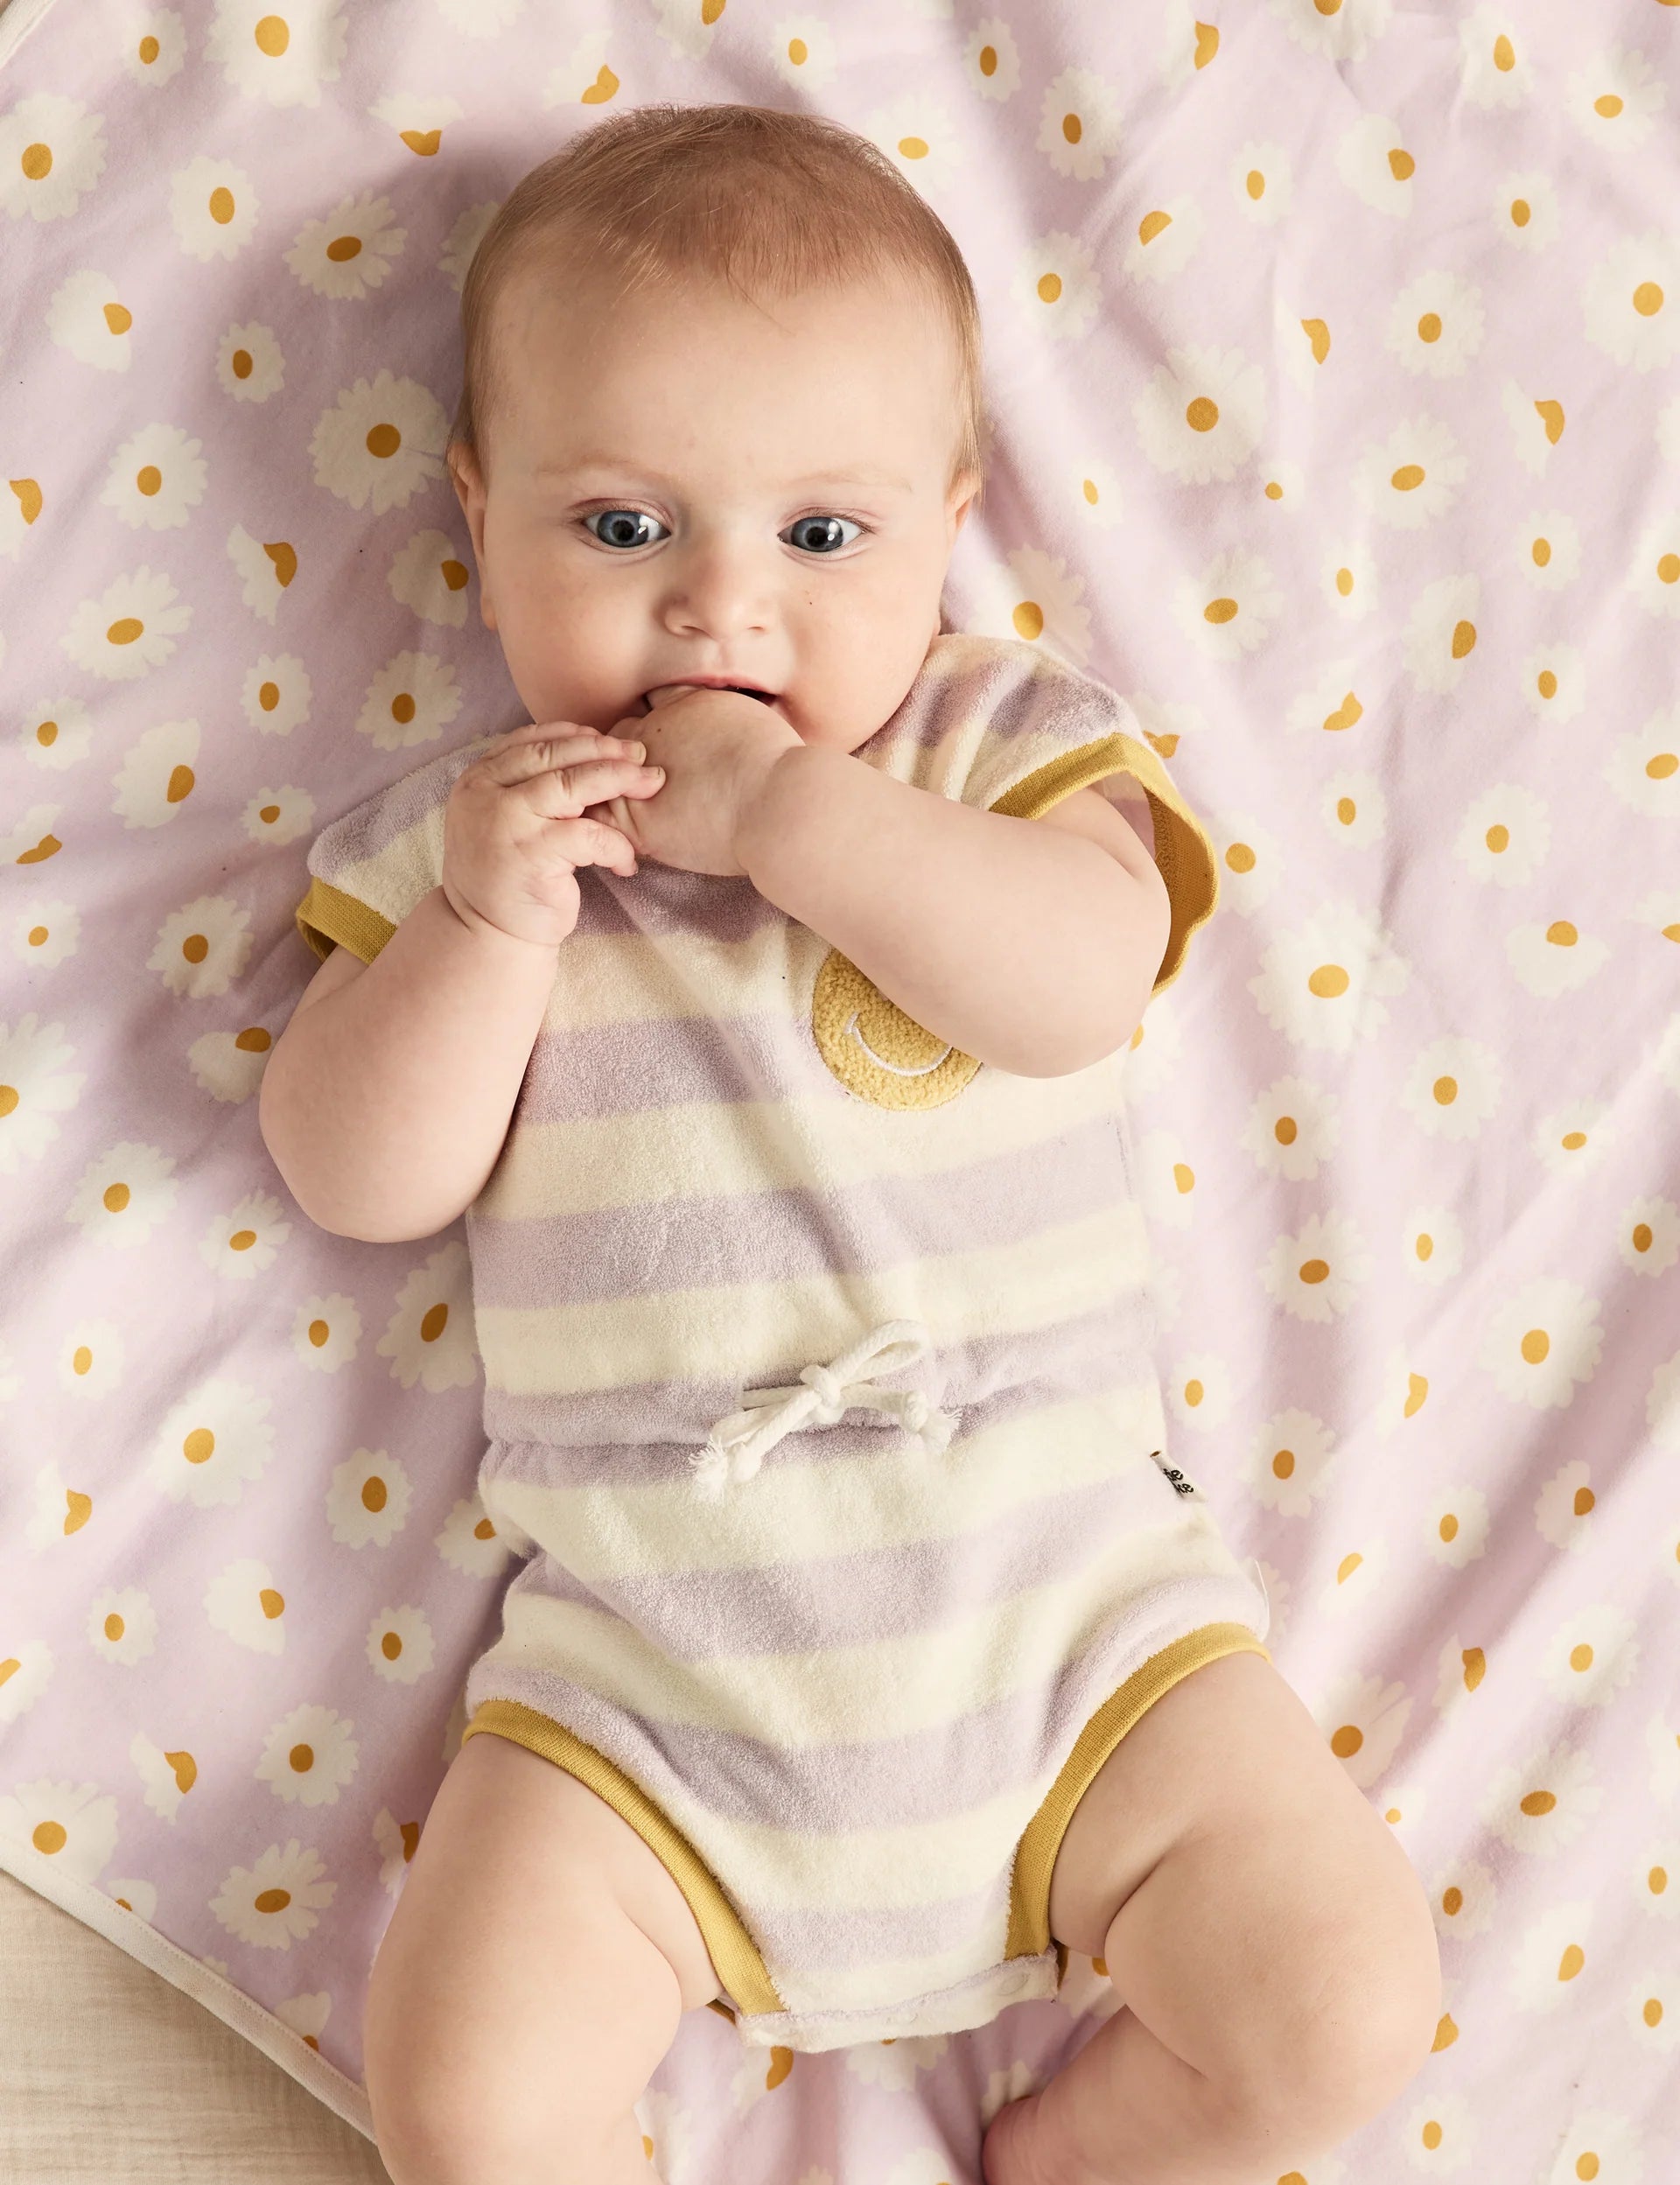 Goldie & Ace - Lavender Smiley Terry Towelling Romper